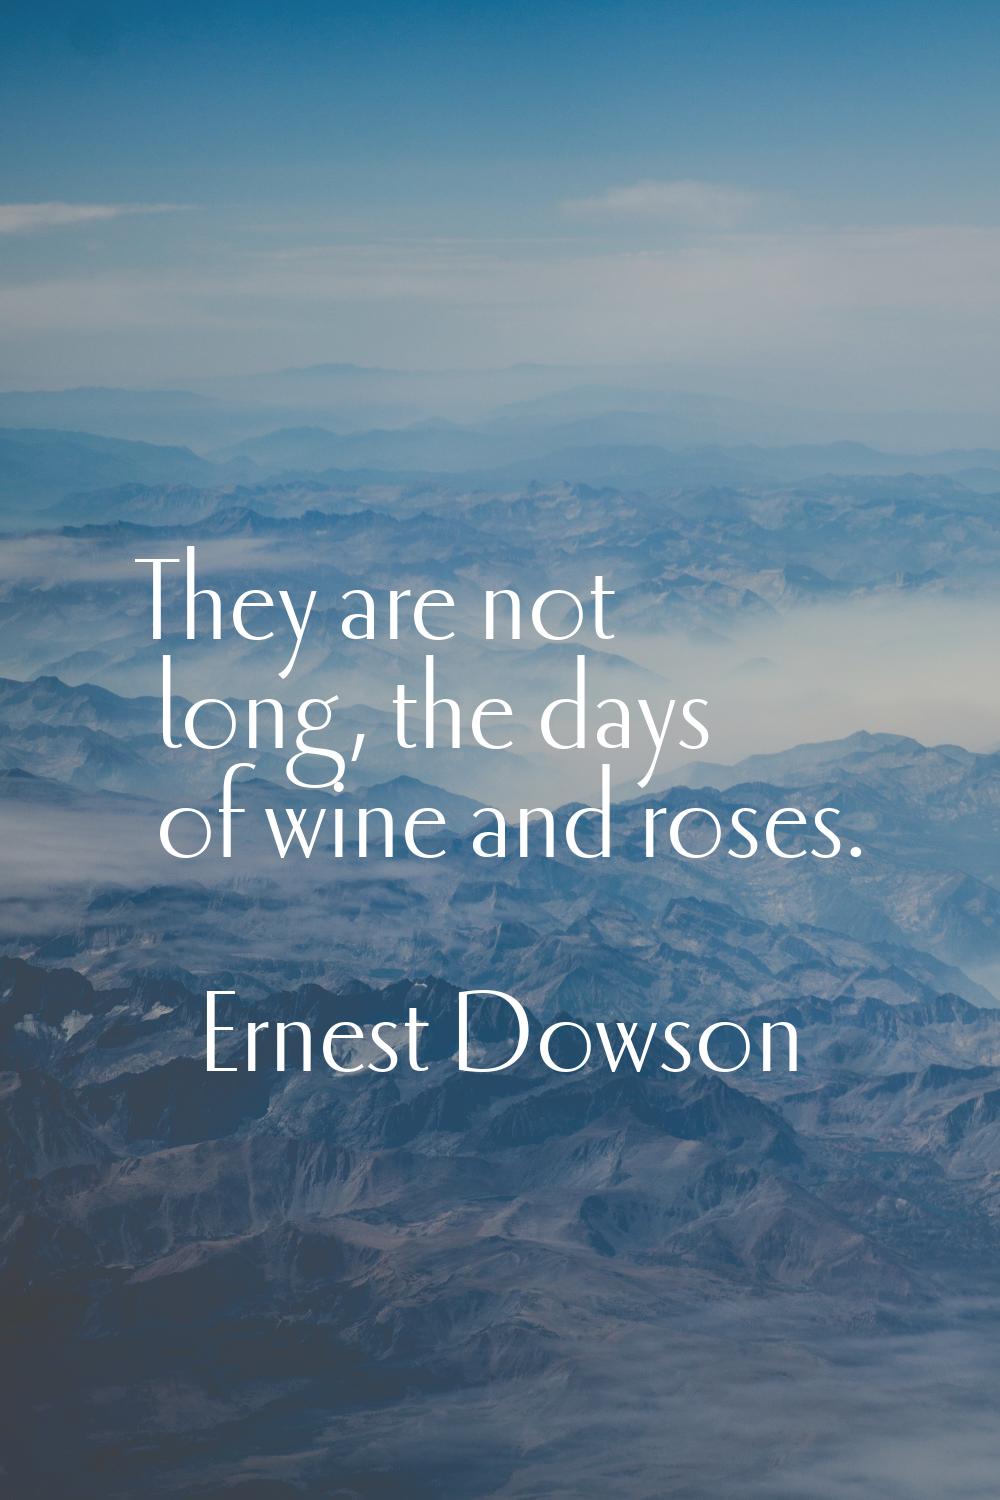 They are not long, the days of wine and roses.